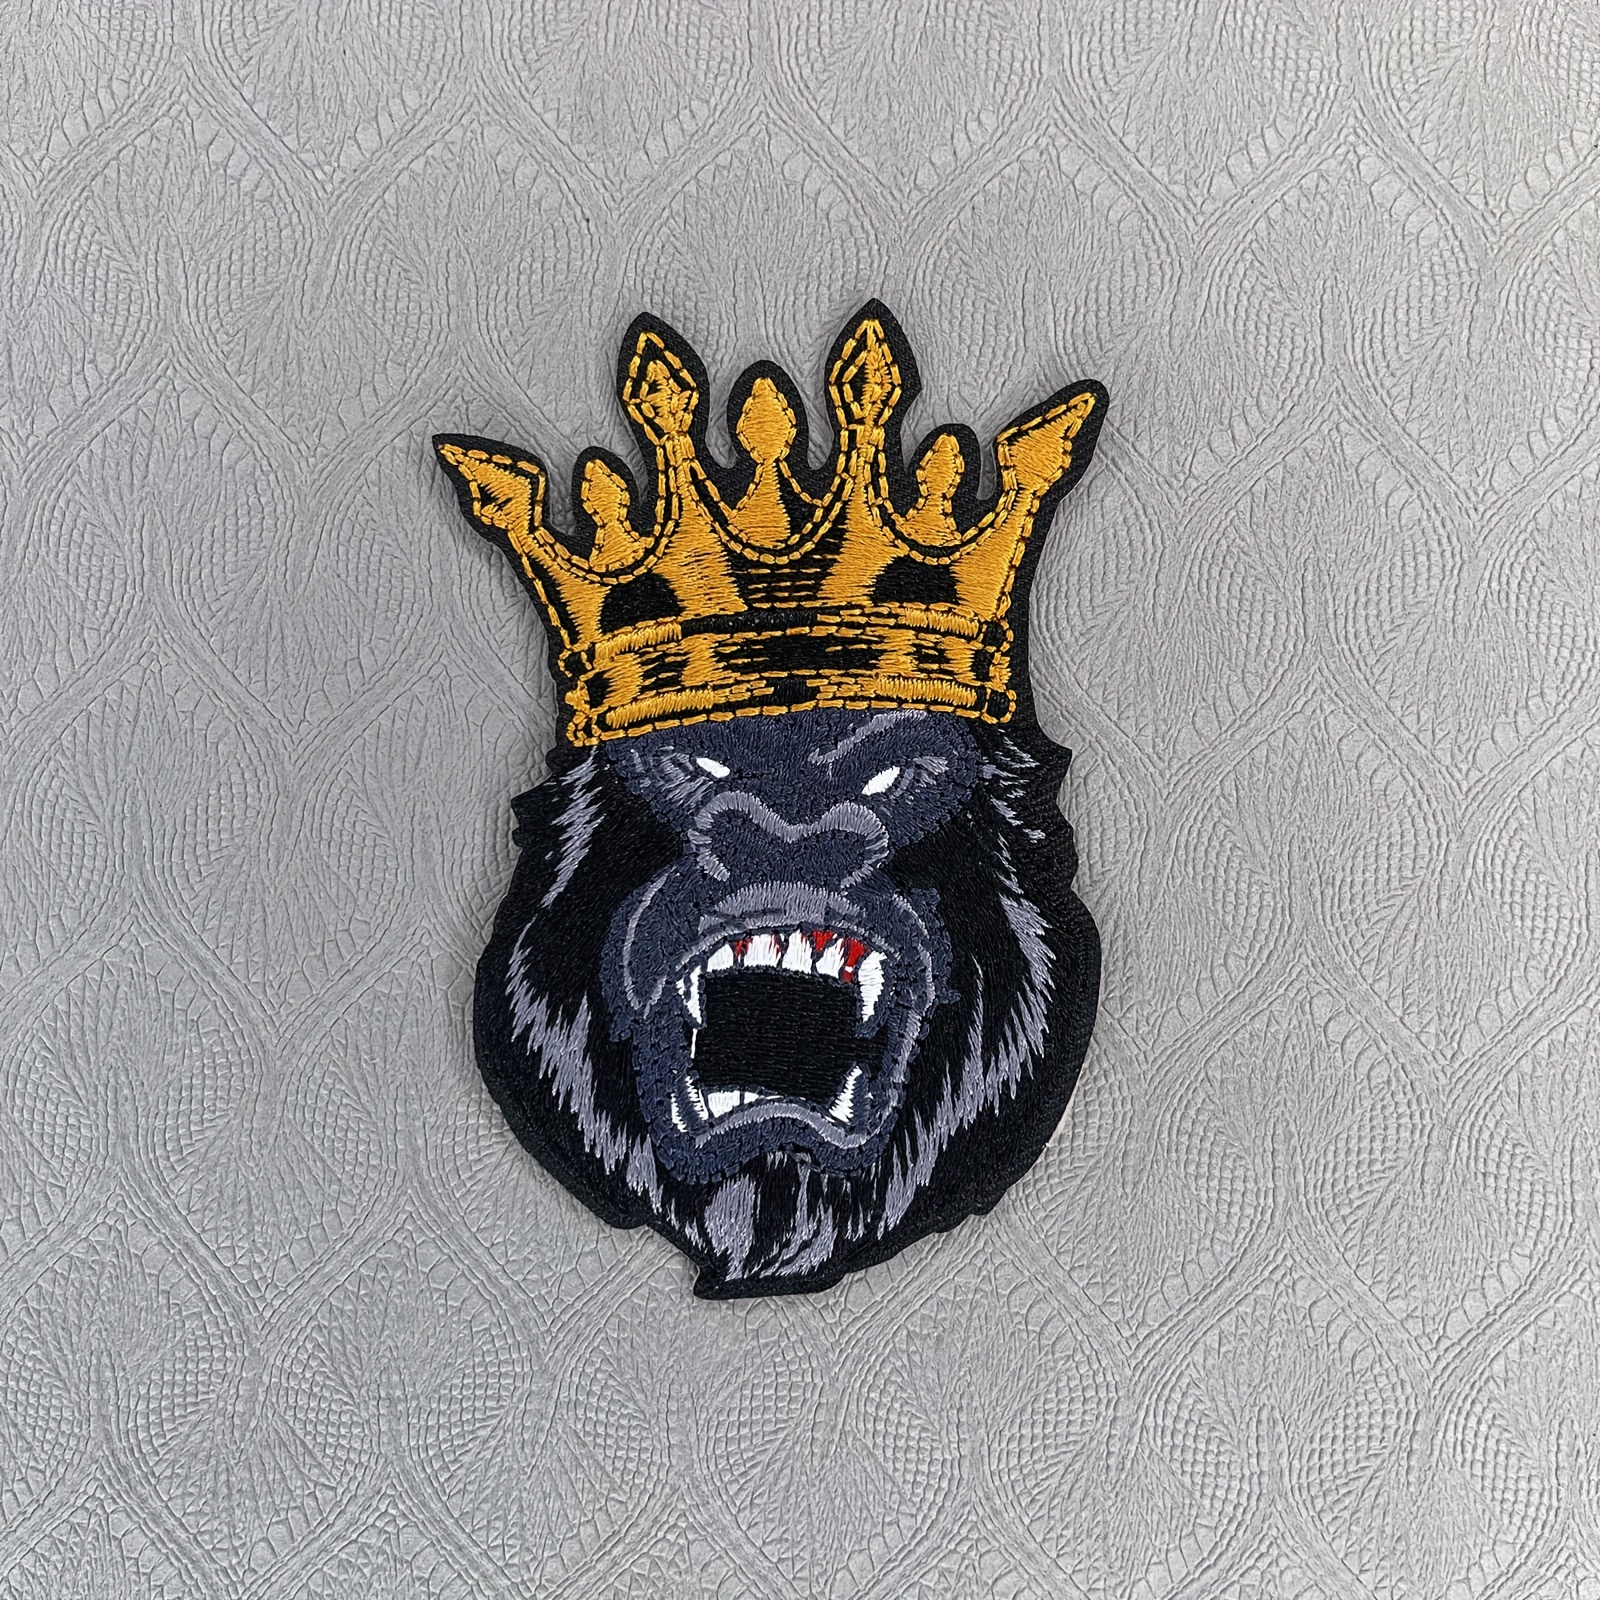 Angry king kong with gorilla crown Mascot Illustrations - Buy t-shirt  designs